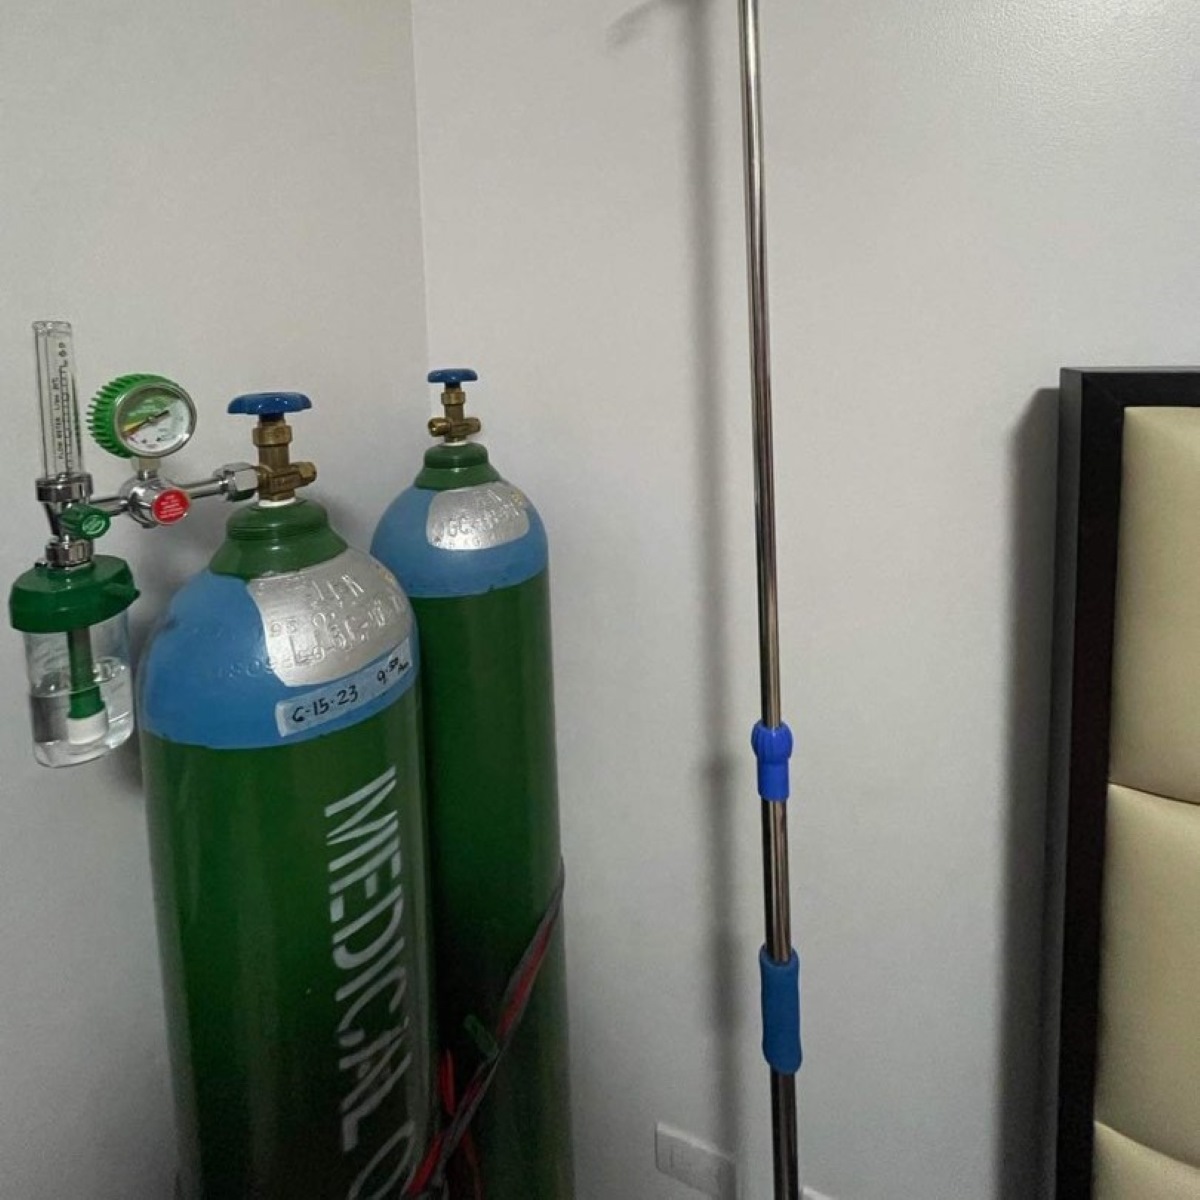 How To Store Oxygen Tanks